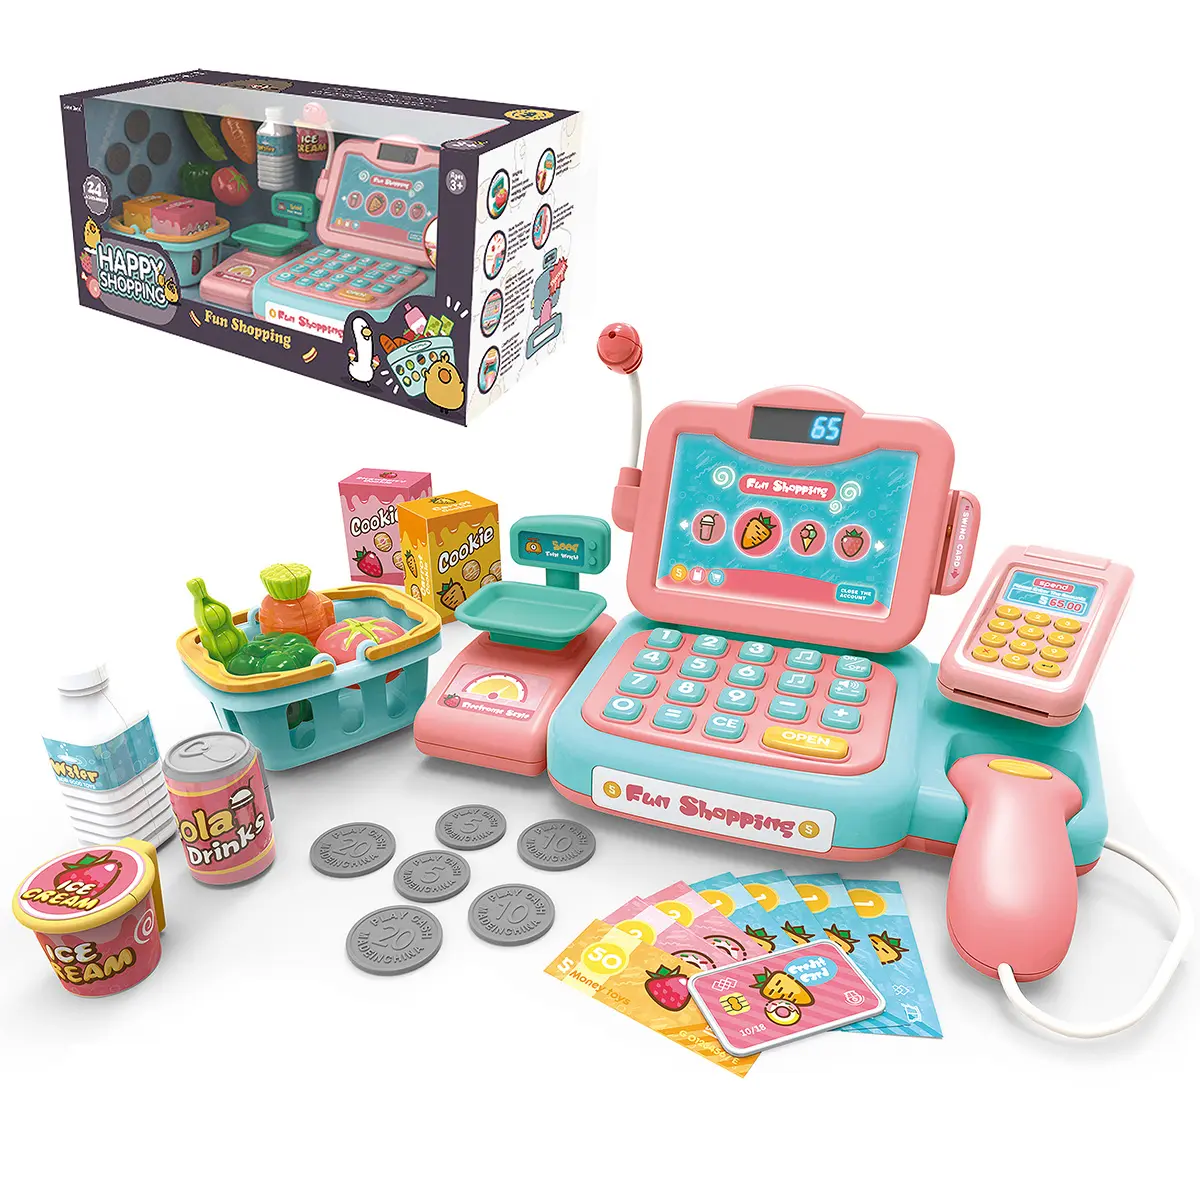 Electronic Toy,Toy Cash register,Plastic Toy